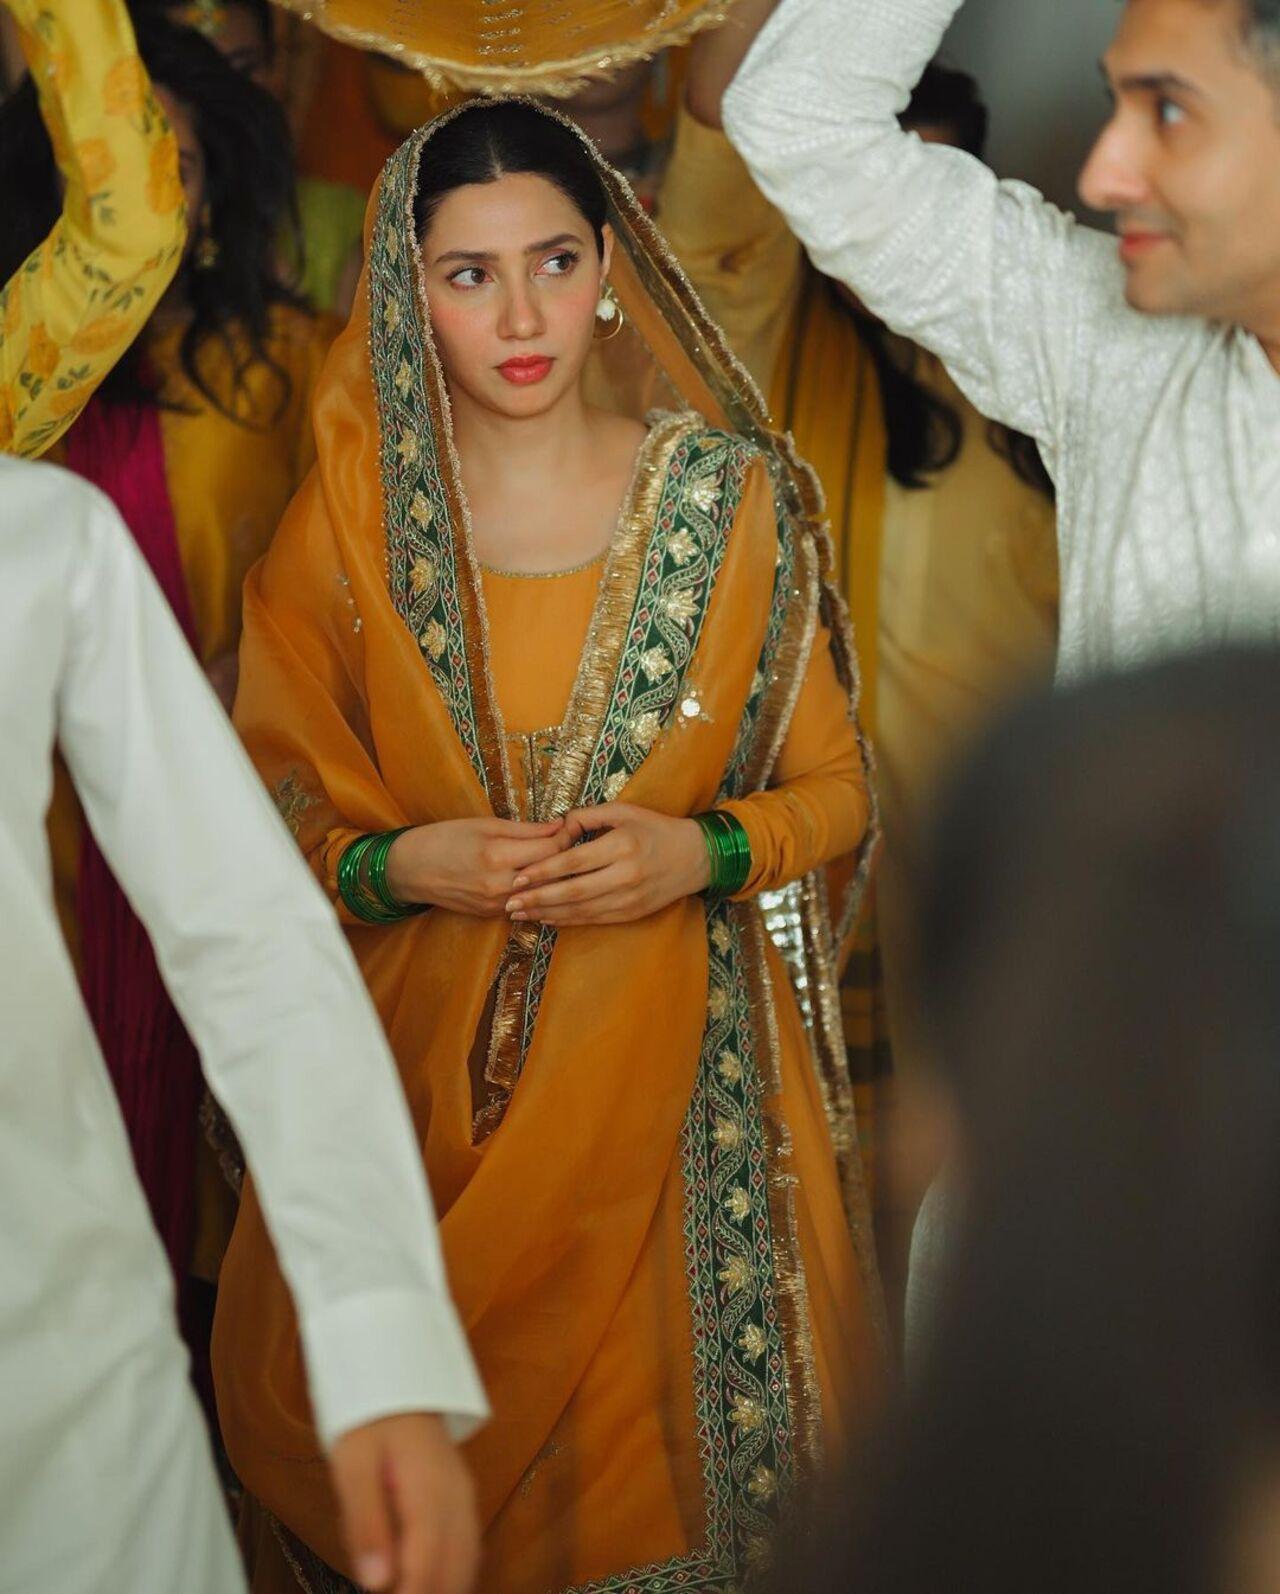 In the pictures, Mahira can be seen dressed in two outfits. One was a delicately embroidered powder blue churidar with an elegant and beautiful dupatta. The other outfit was orange in colour with a green border. She plucked buds of mogra and adorned her earrings with them